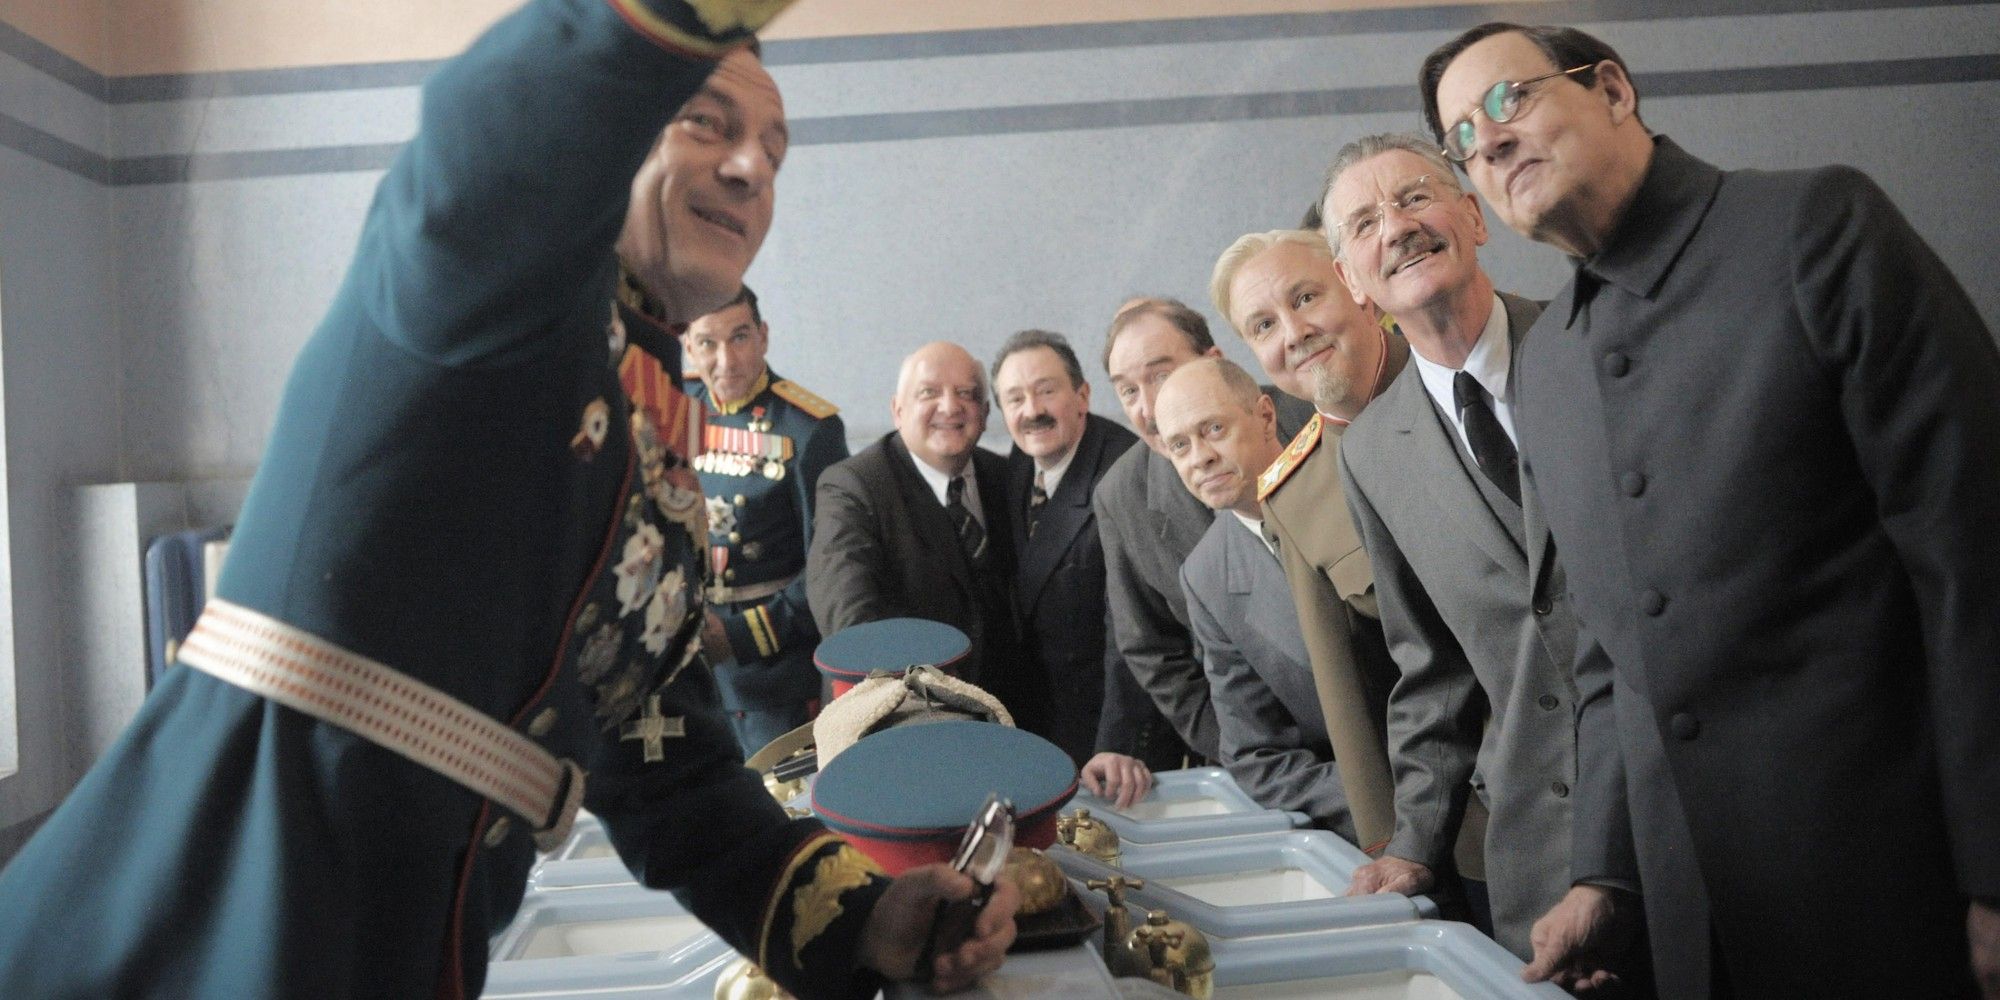 Several of Stalin’s aides take a selfie together